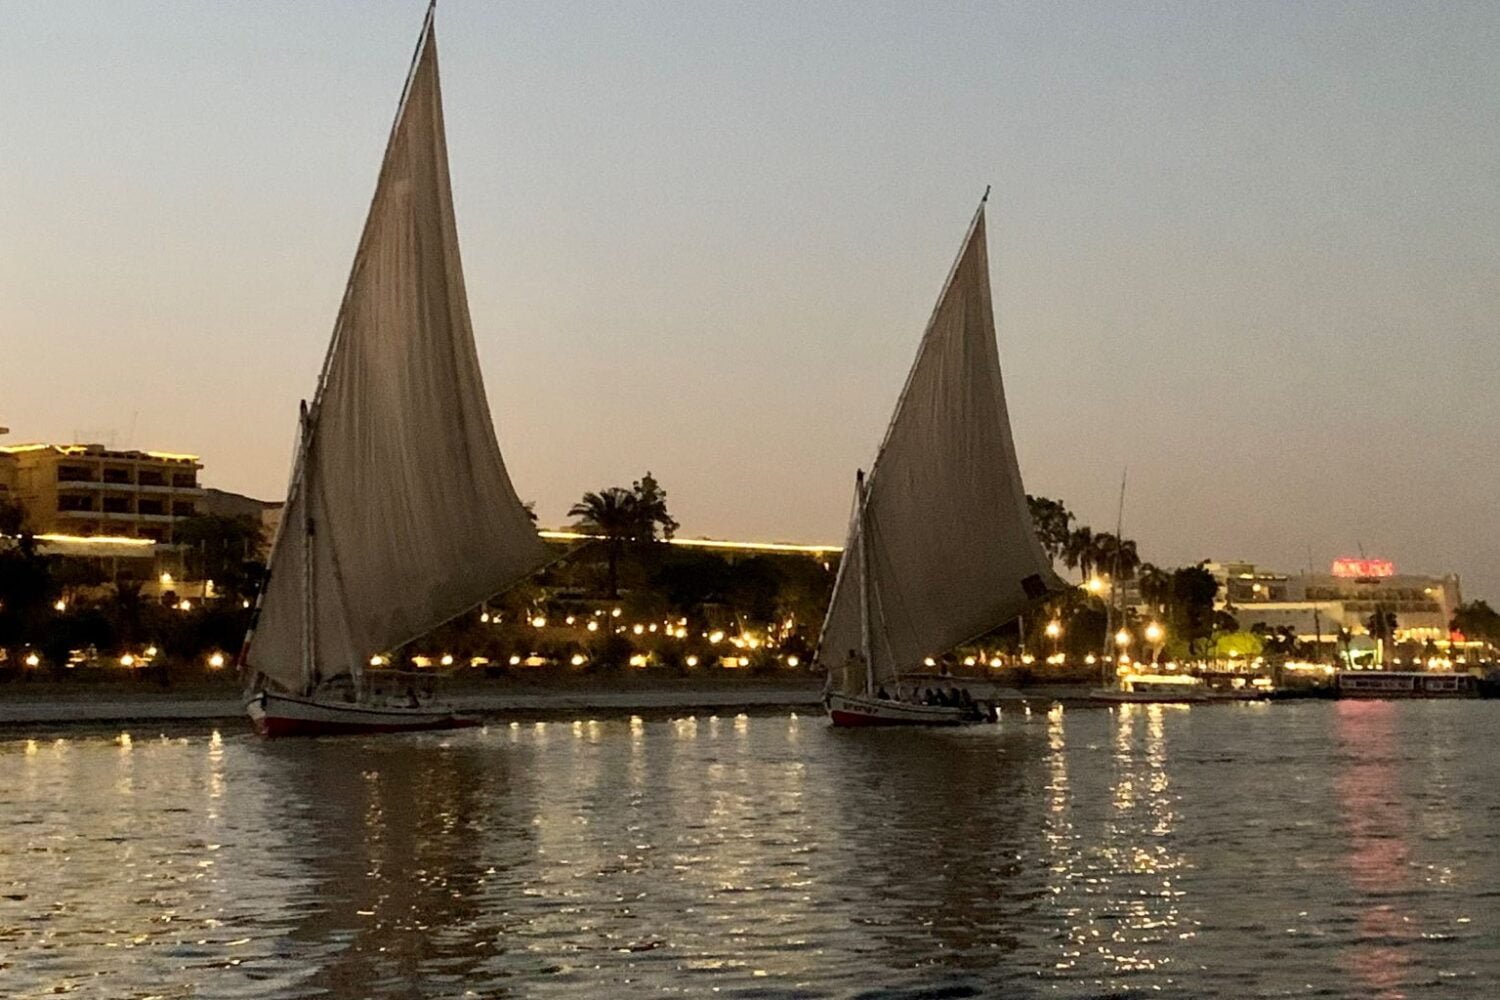 2 Day Felucca Cruise From Aswan